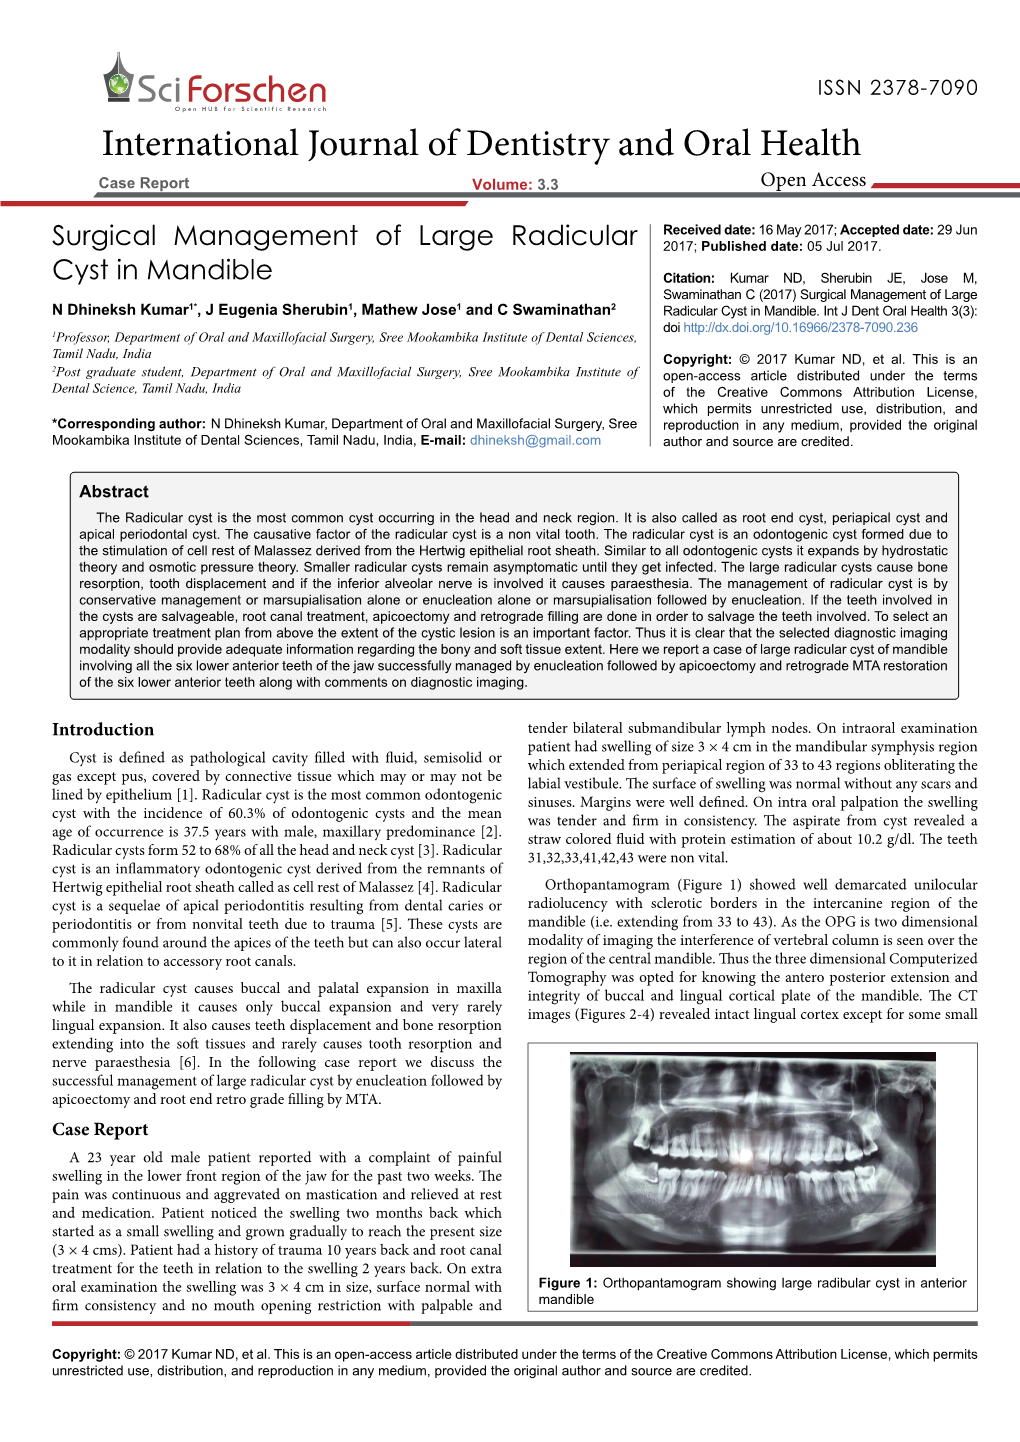 Surgical Management of Large Radicularcyst in Mandible